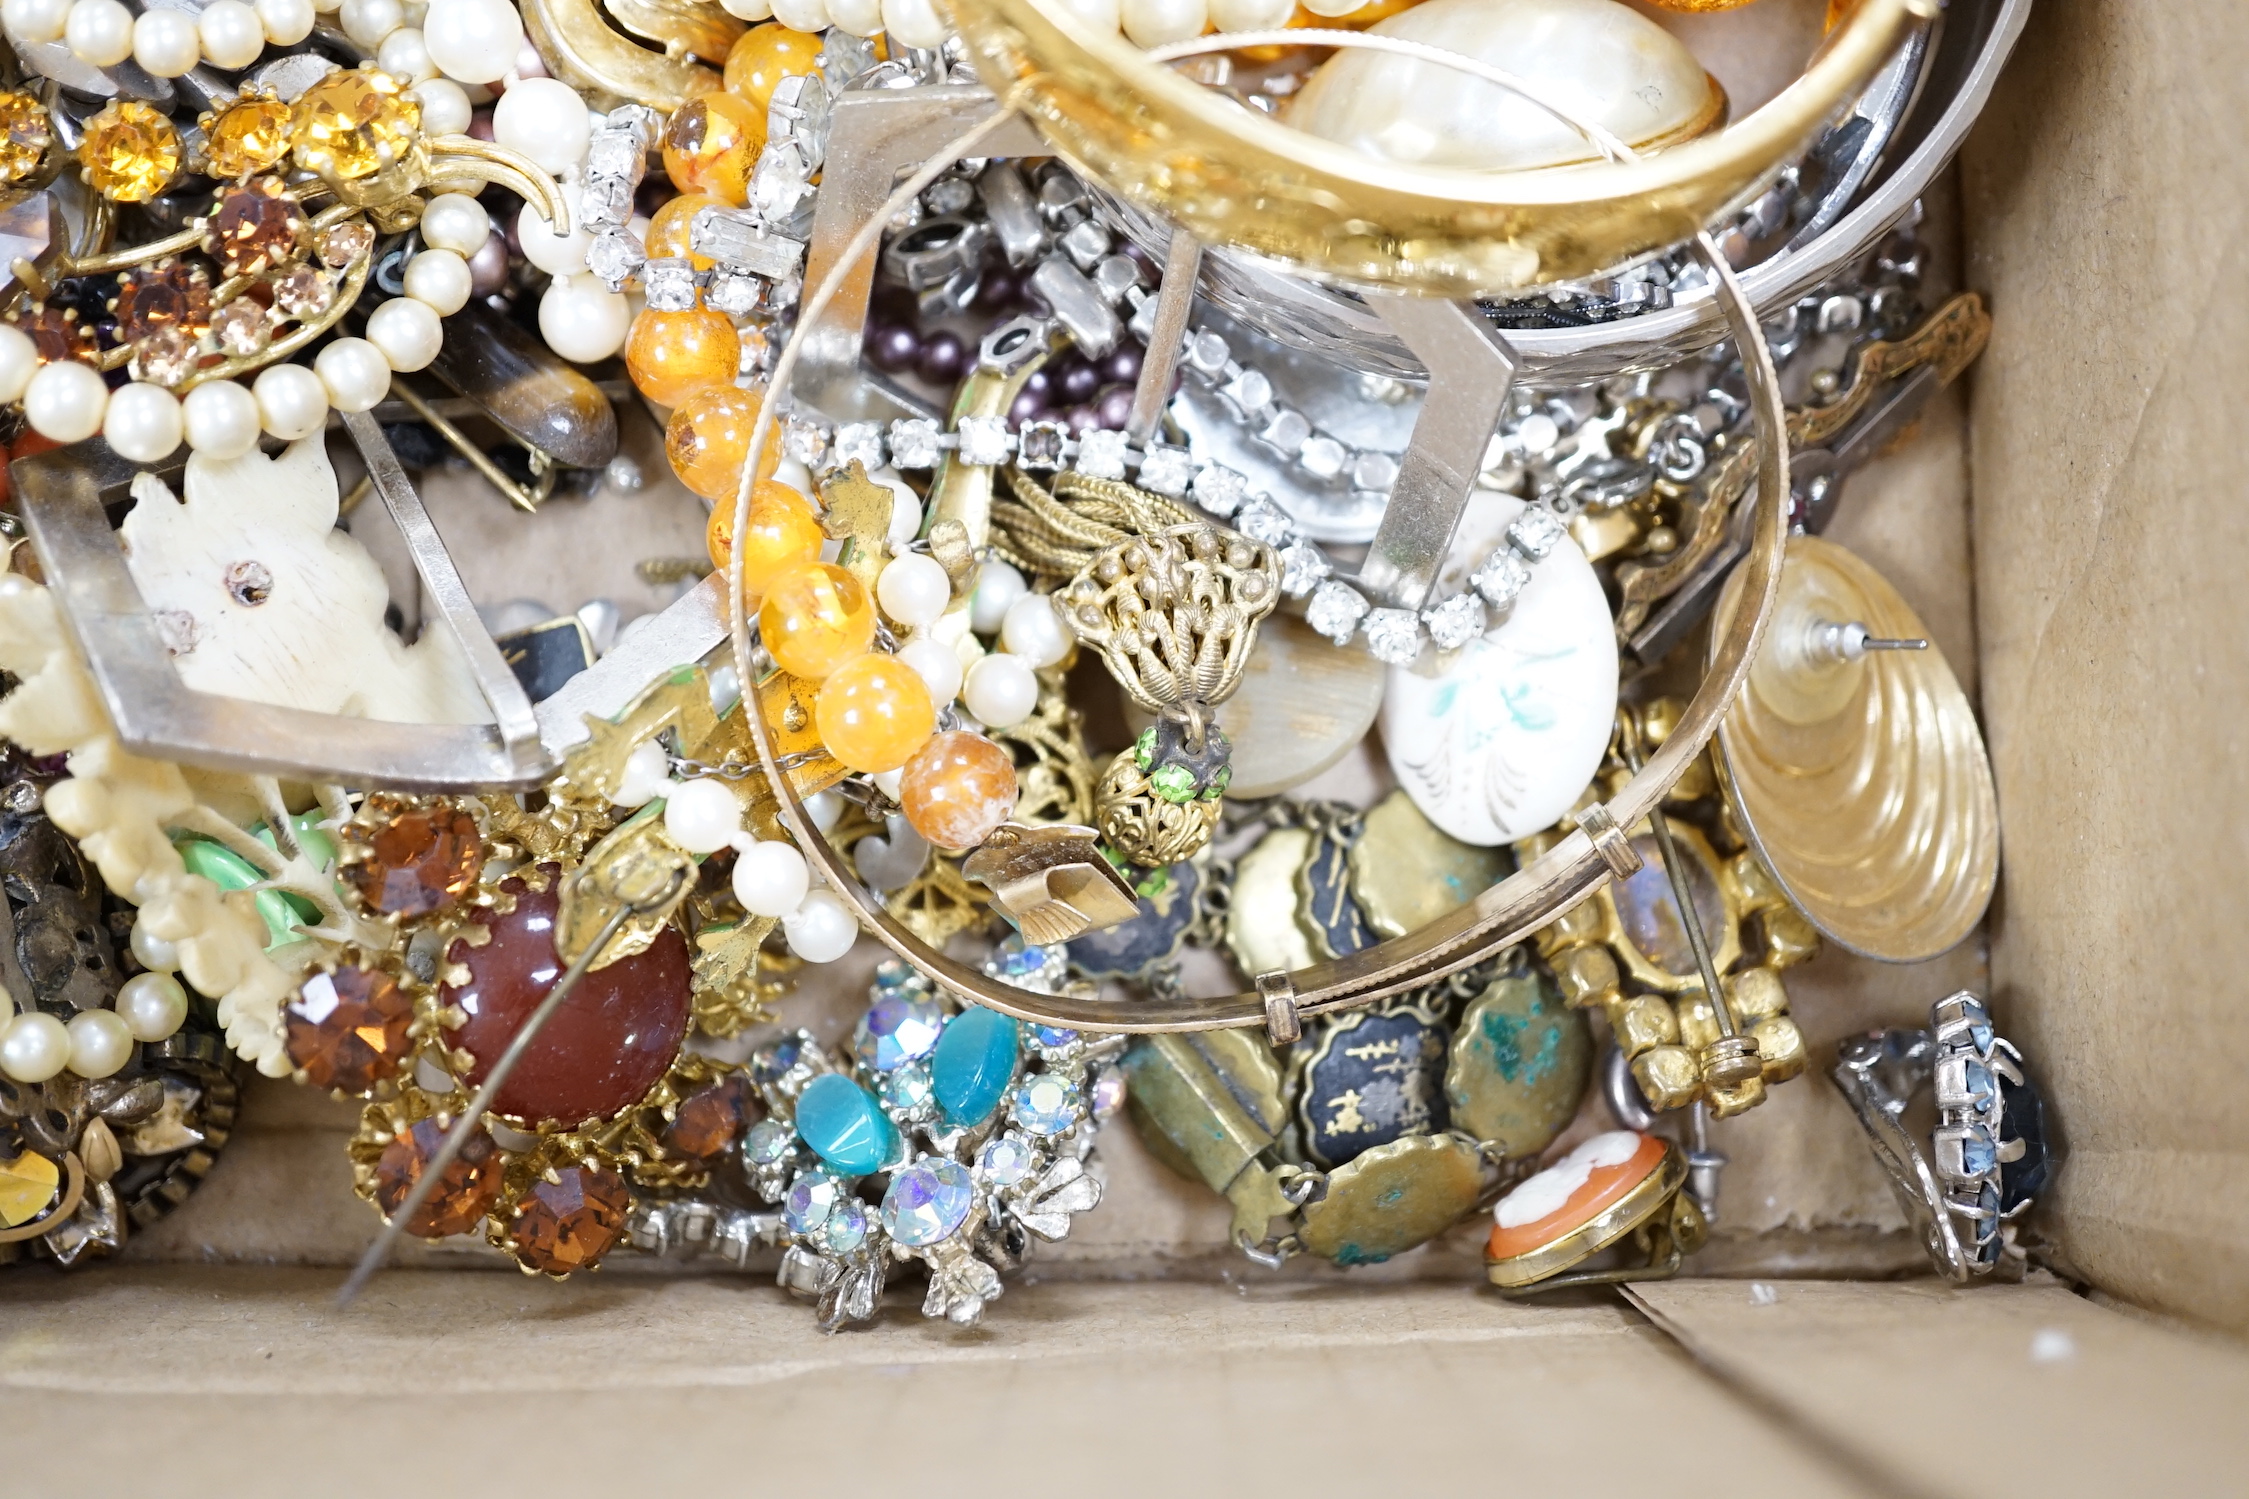 A quantity of mixed mainly costume jewellery, including bangles, necklaces brooches etc.